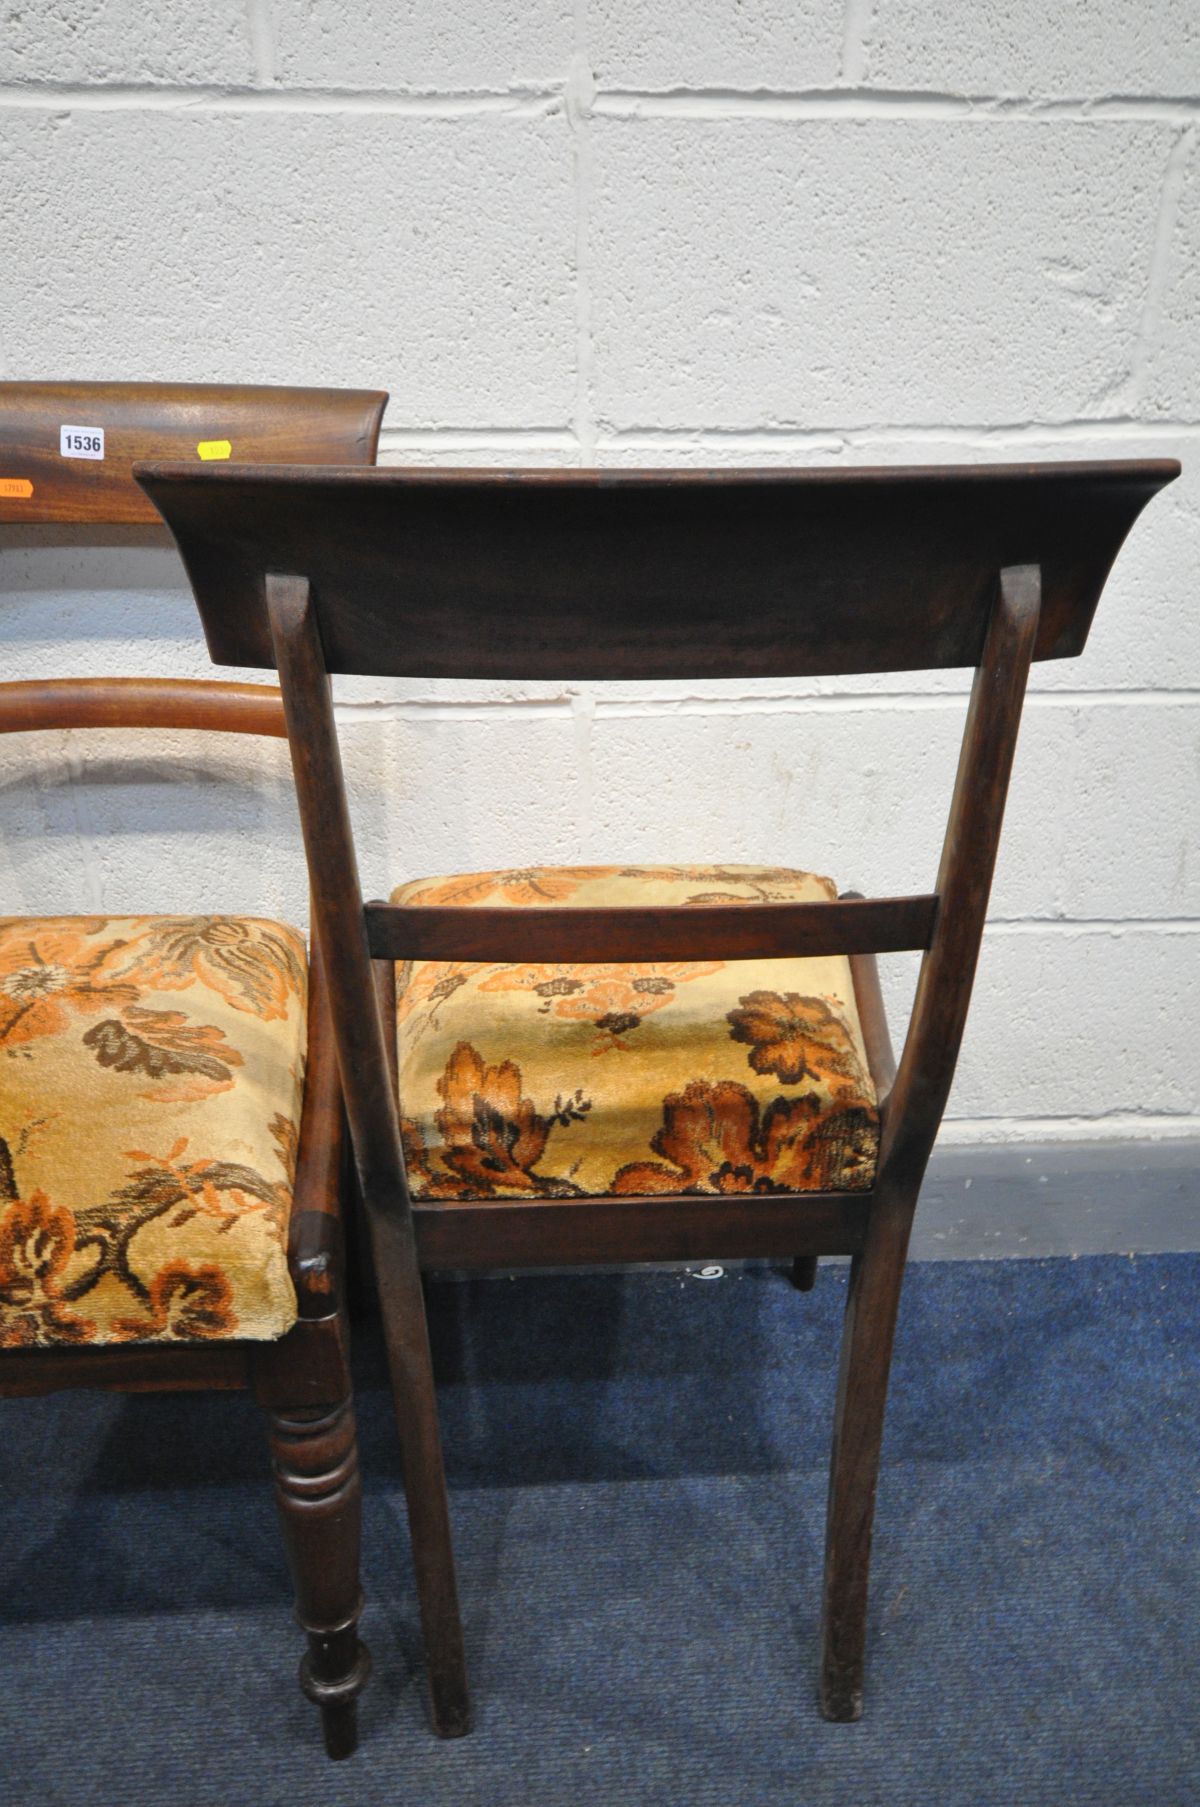 A PAIR OF REGENCY MAHOGANY BAR BACK CHAIRS, with floral upholstered seat pads, turned front legs ( - Image 3 of 4